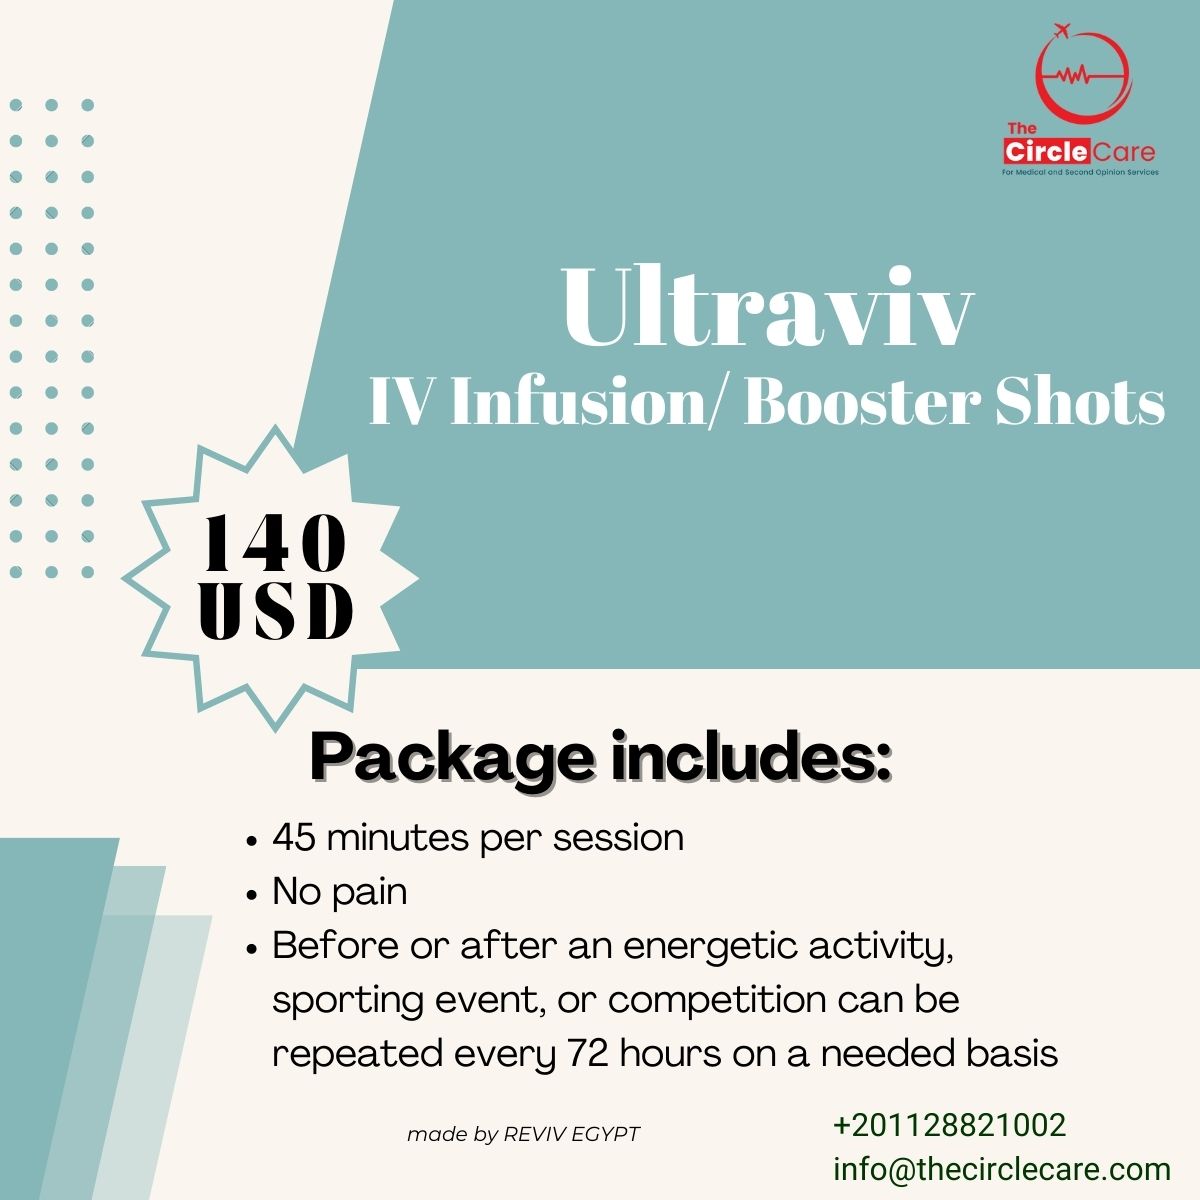 Ultraviv: - It is for recovery. It is written for cases recovering from diseases, body pain, general fatigue, and current symptoms that start from nausea, through headaches, and others.